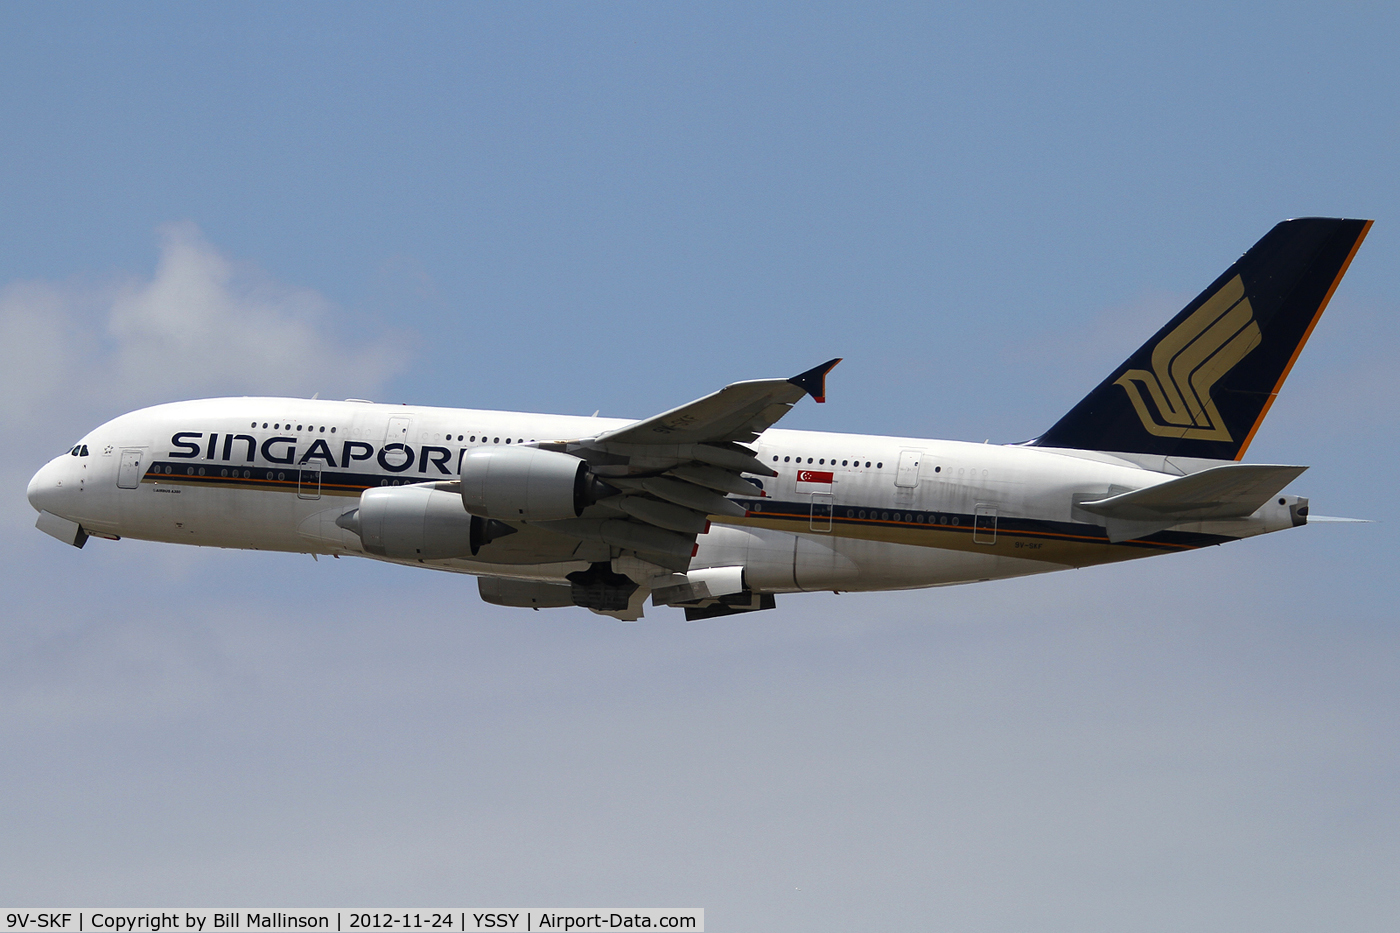 9V-SKF, 2008 Airbus A380-841 C/N 012, away from 34L